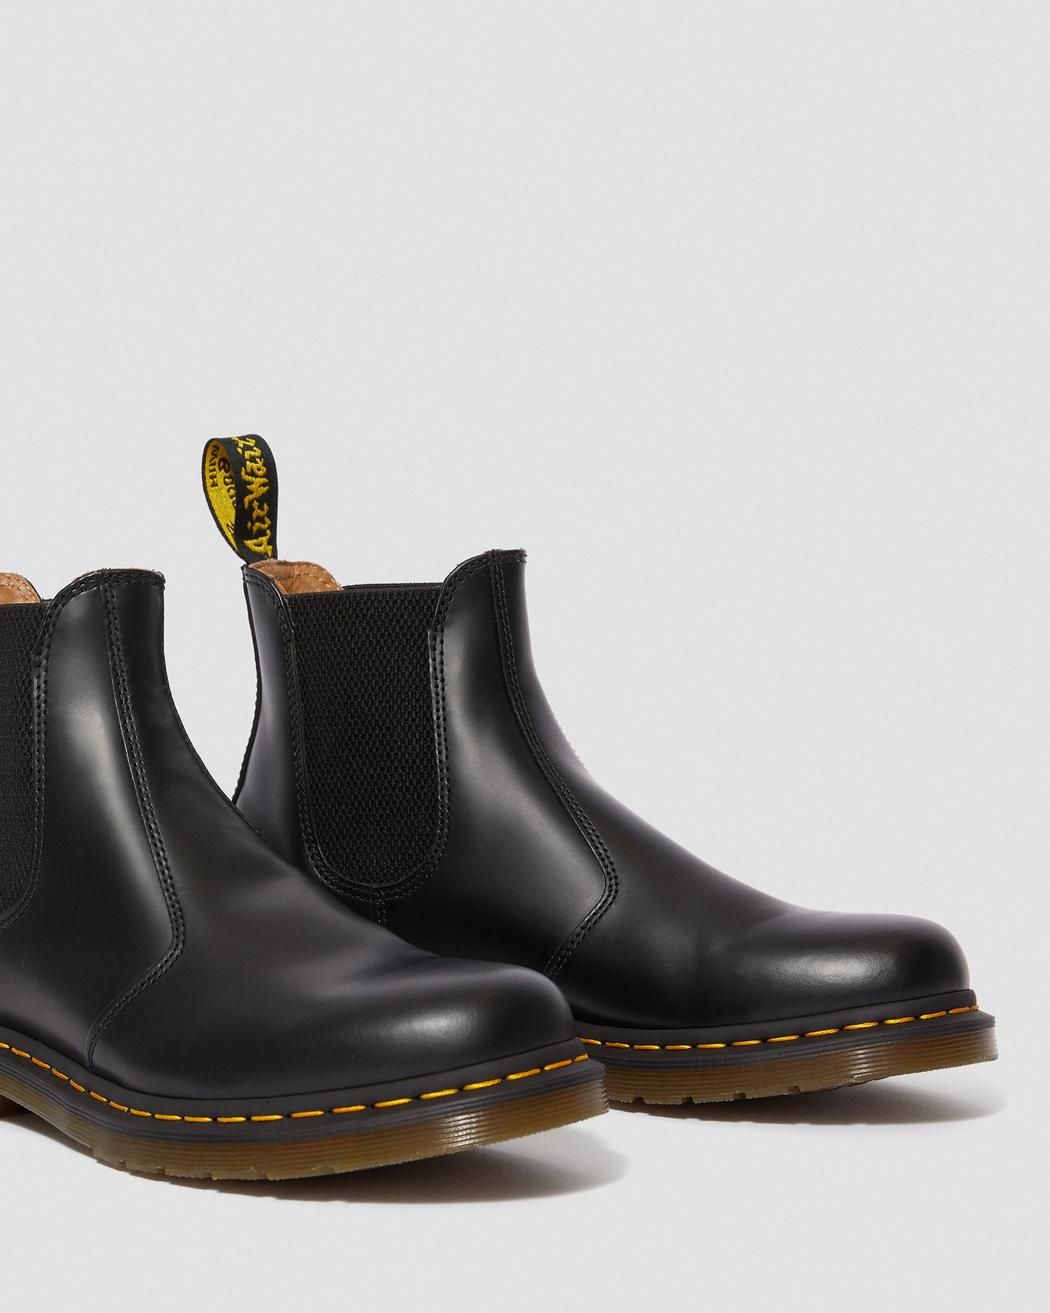 2976 Yellow Stitch Smooth Leather Chelsea Boots - LoveShoesClub.com